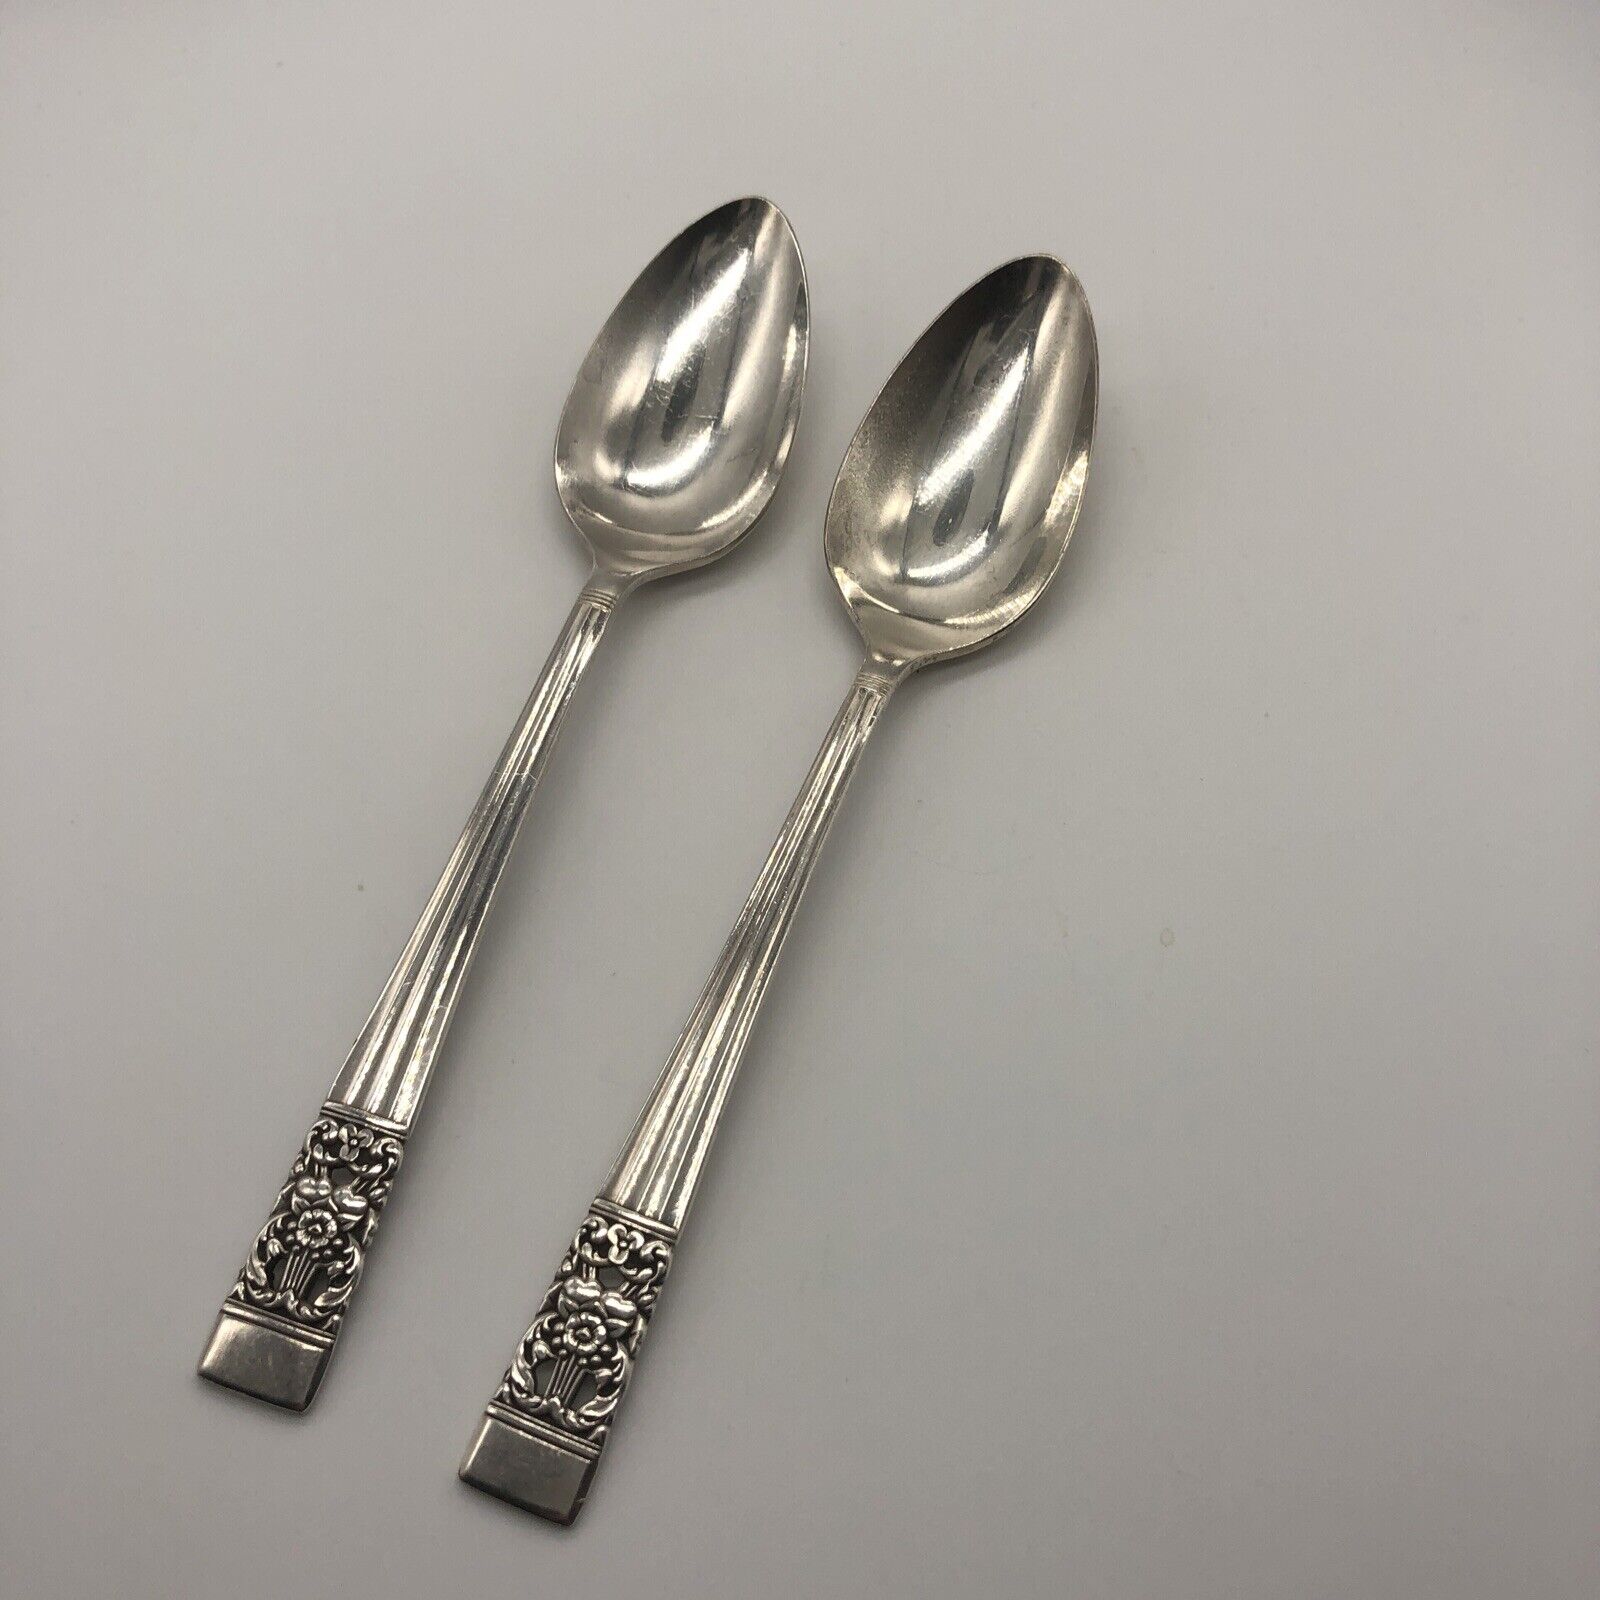 Set of 2 Oneida Coronation Community Plate Place/Oval Spoons 1936 Silver Plate